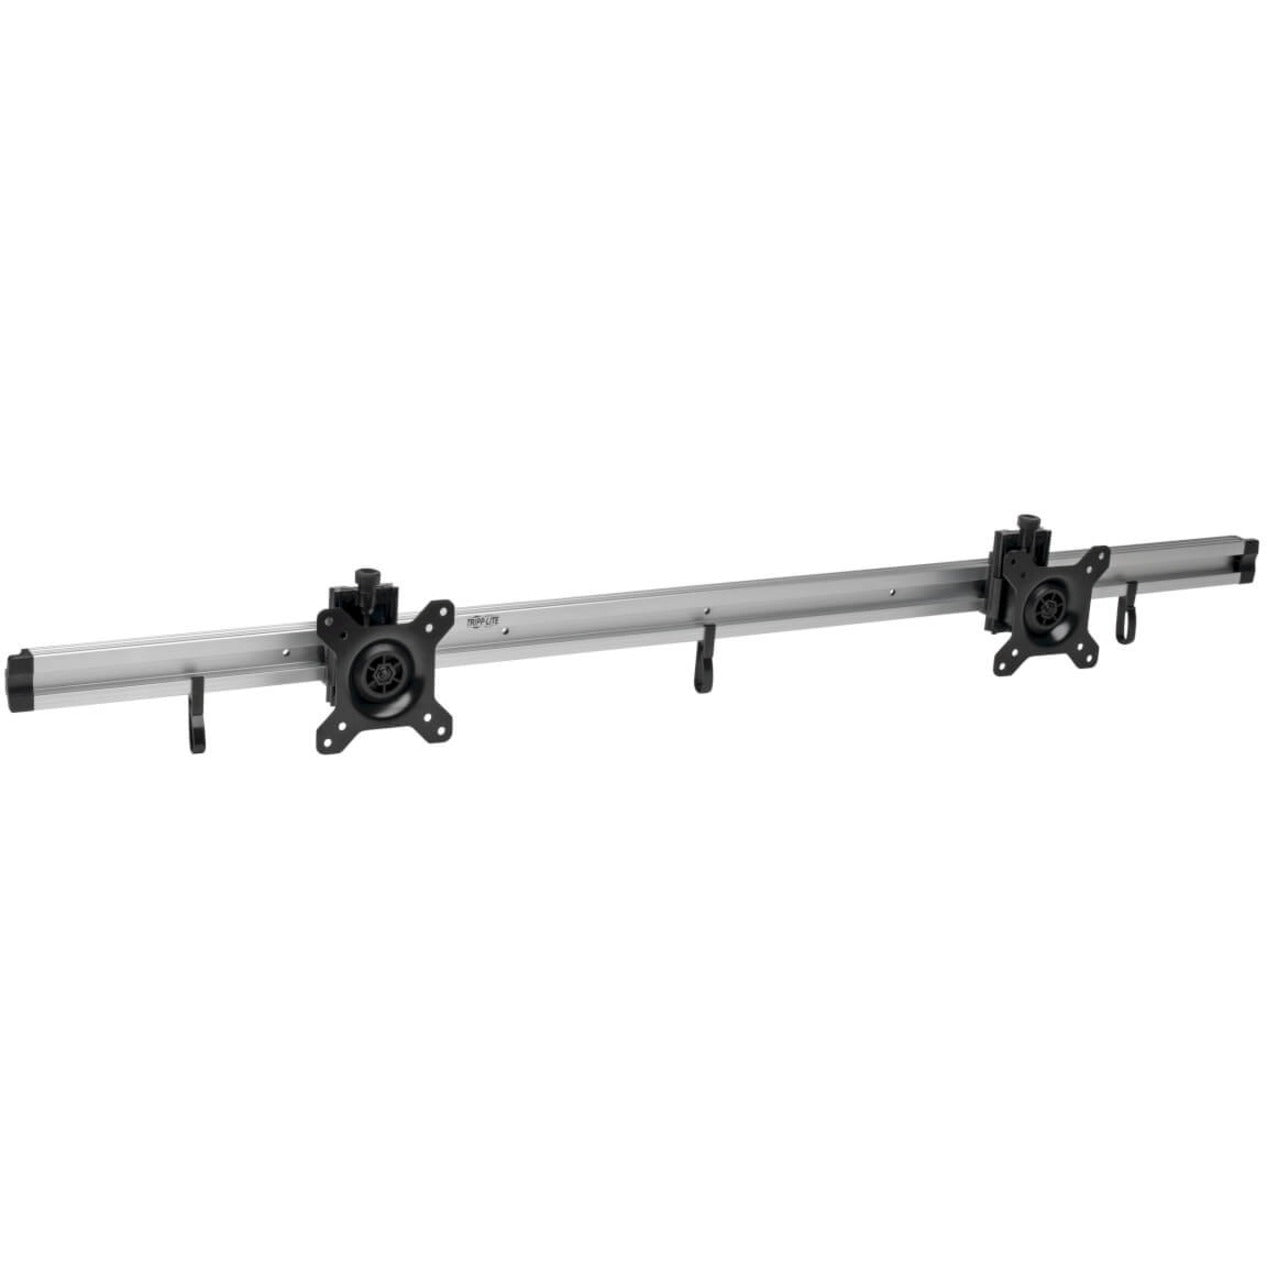 Tripp Lite DMR1024X2 Dual Flat-Panel Rail Wall Mount for 10" to 24" TVs and Monitors, Silver, 36 lb Maximum Load Capacity